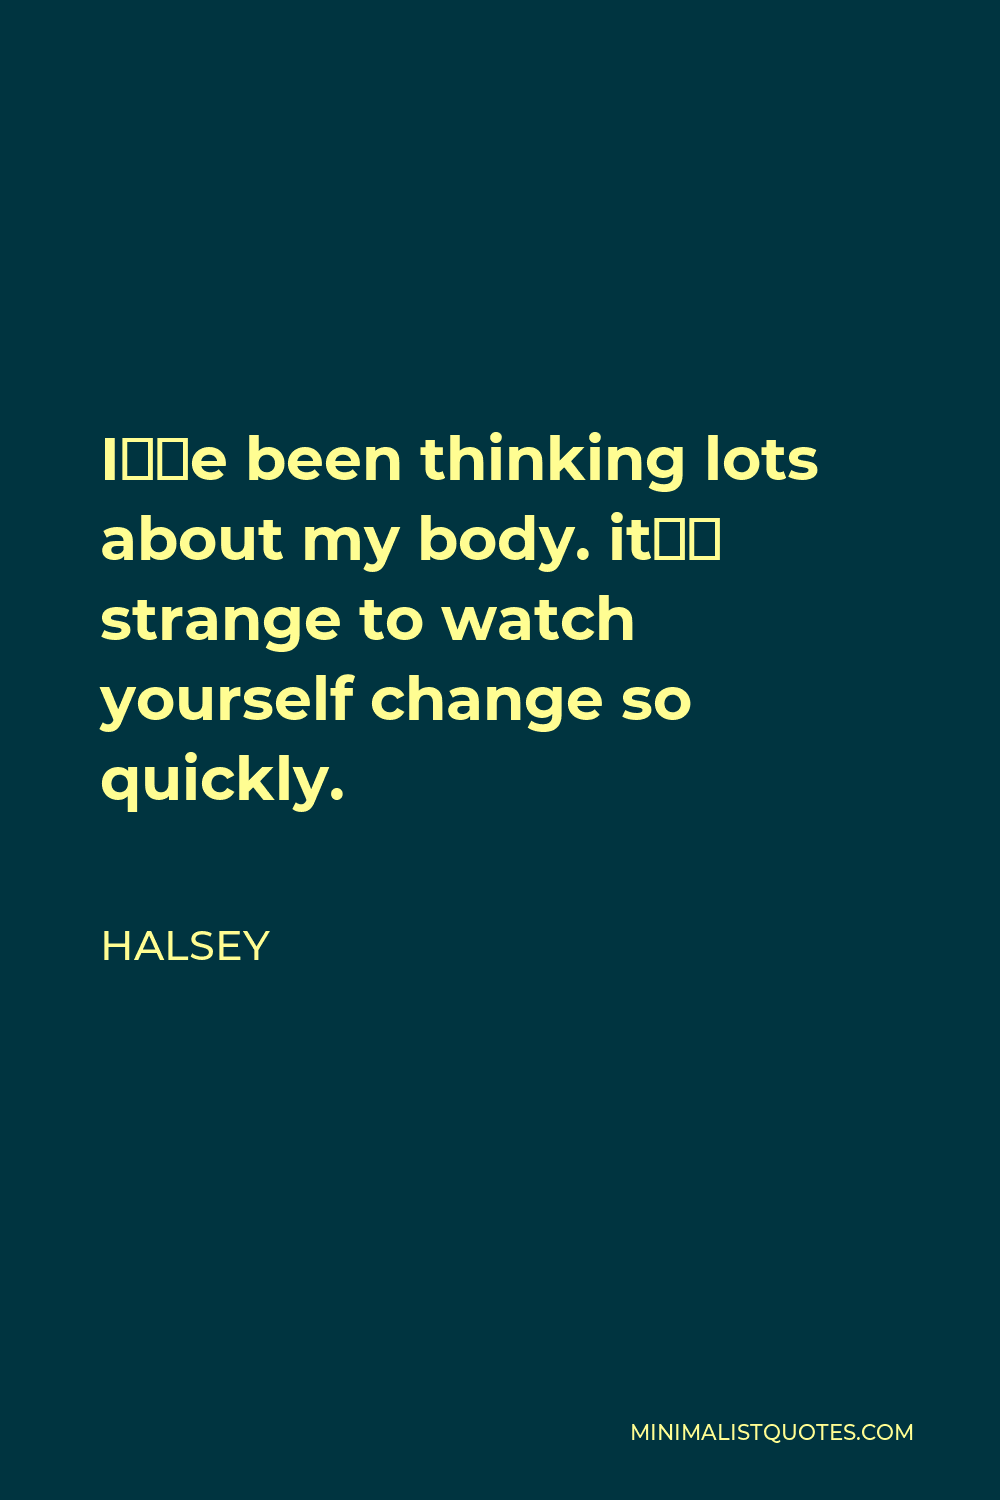 Halsey Quote - I’ve been thinking lots about my body. it’s strange to watch yourself change so quickly.